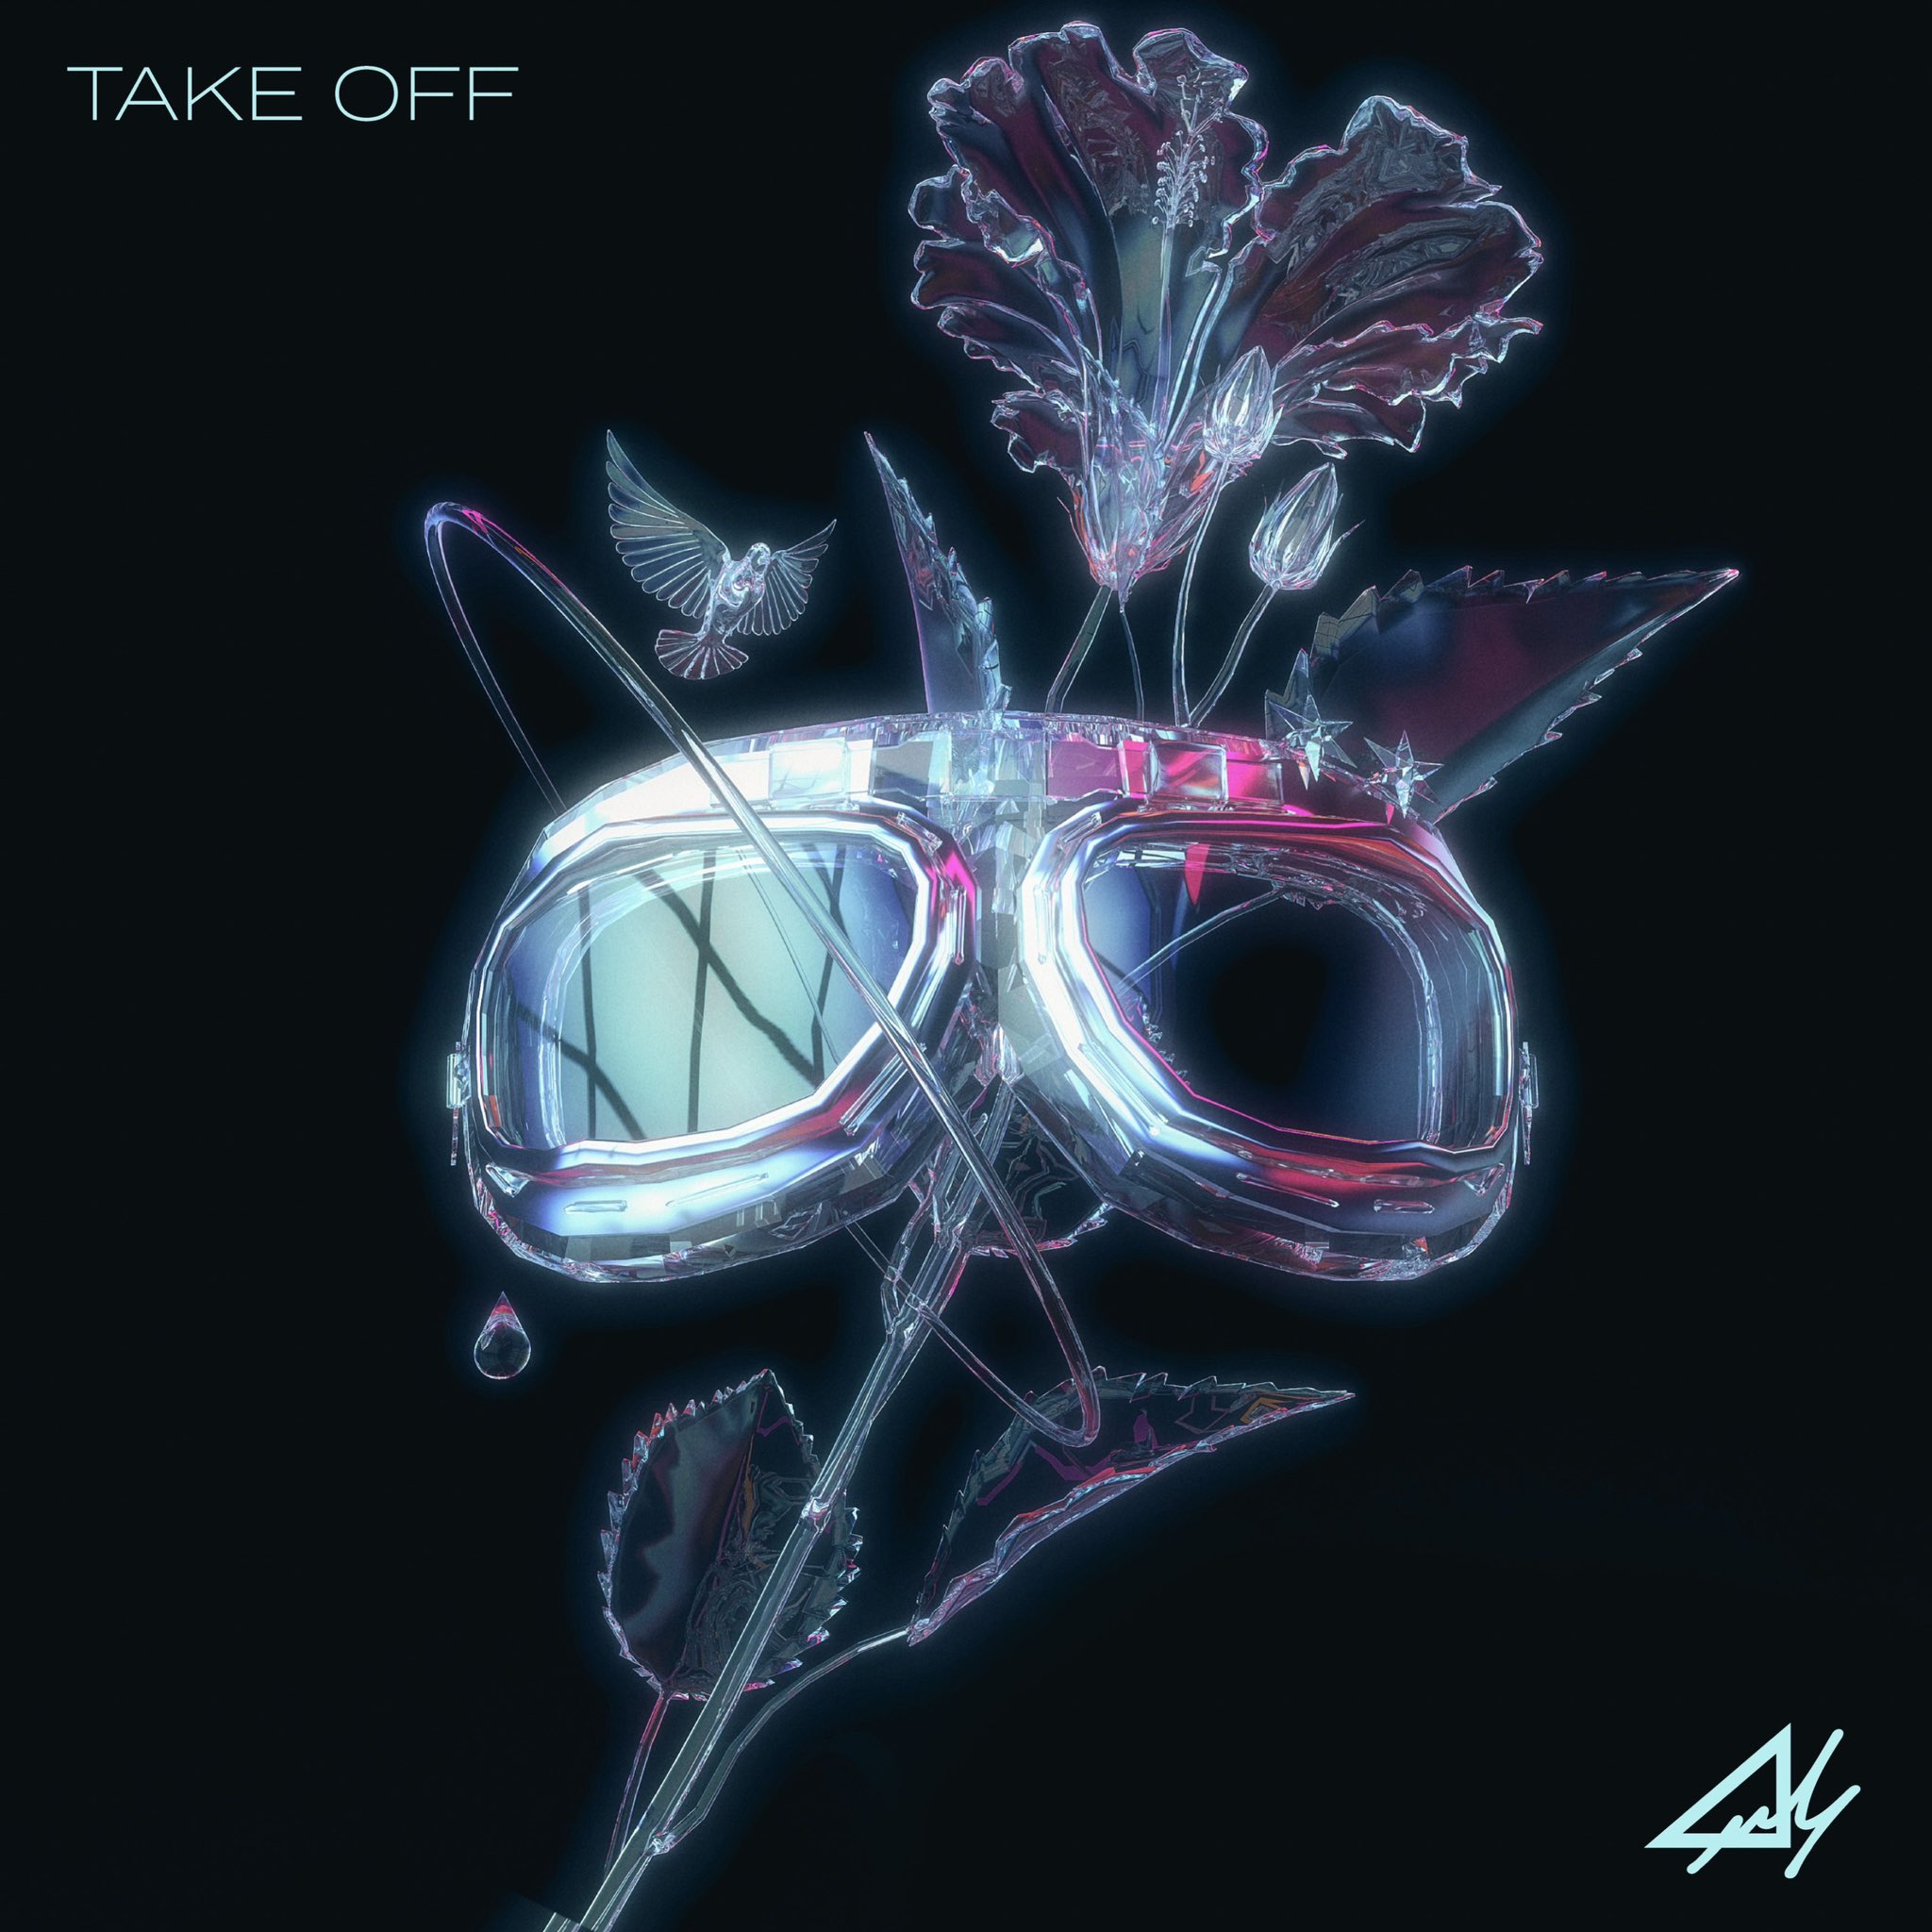 Anly - TAKE OFF